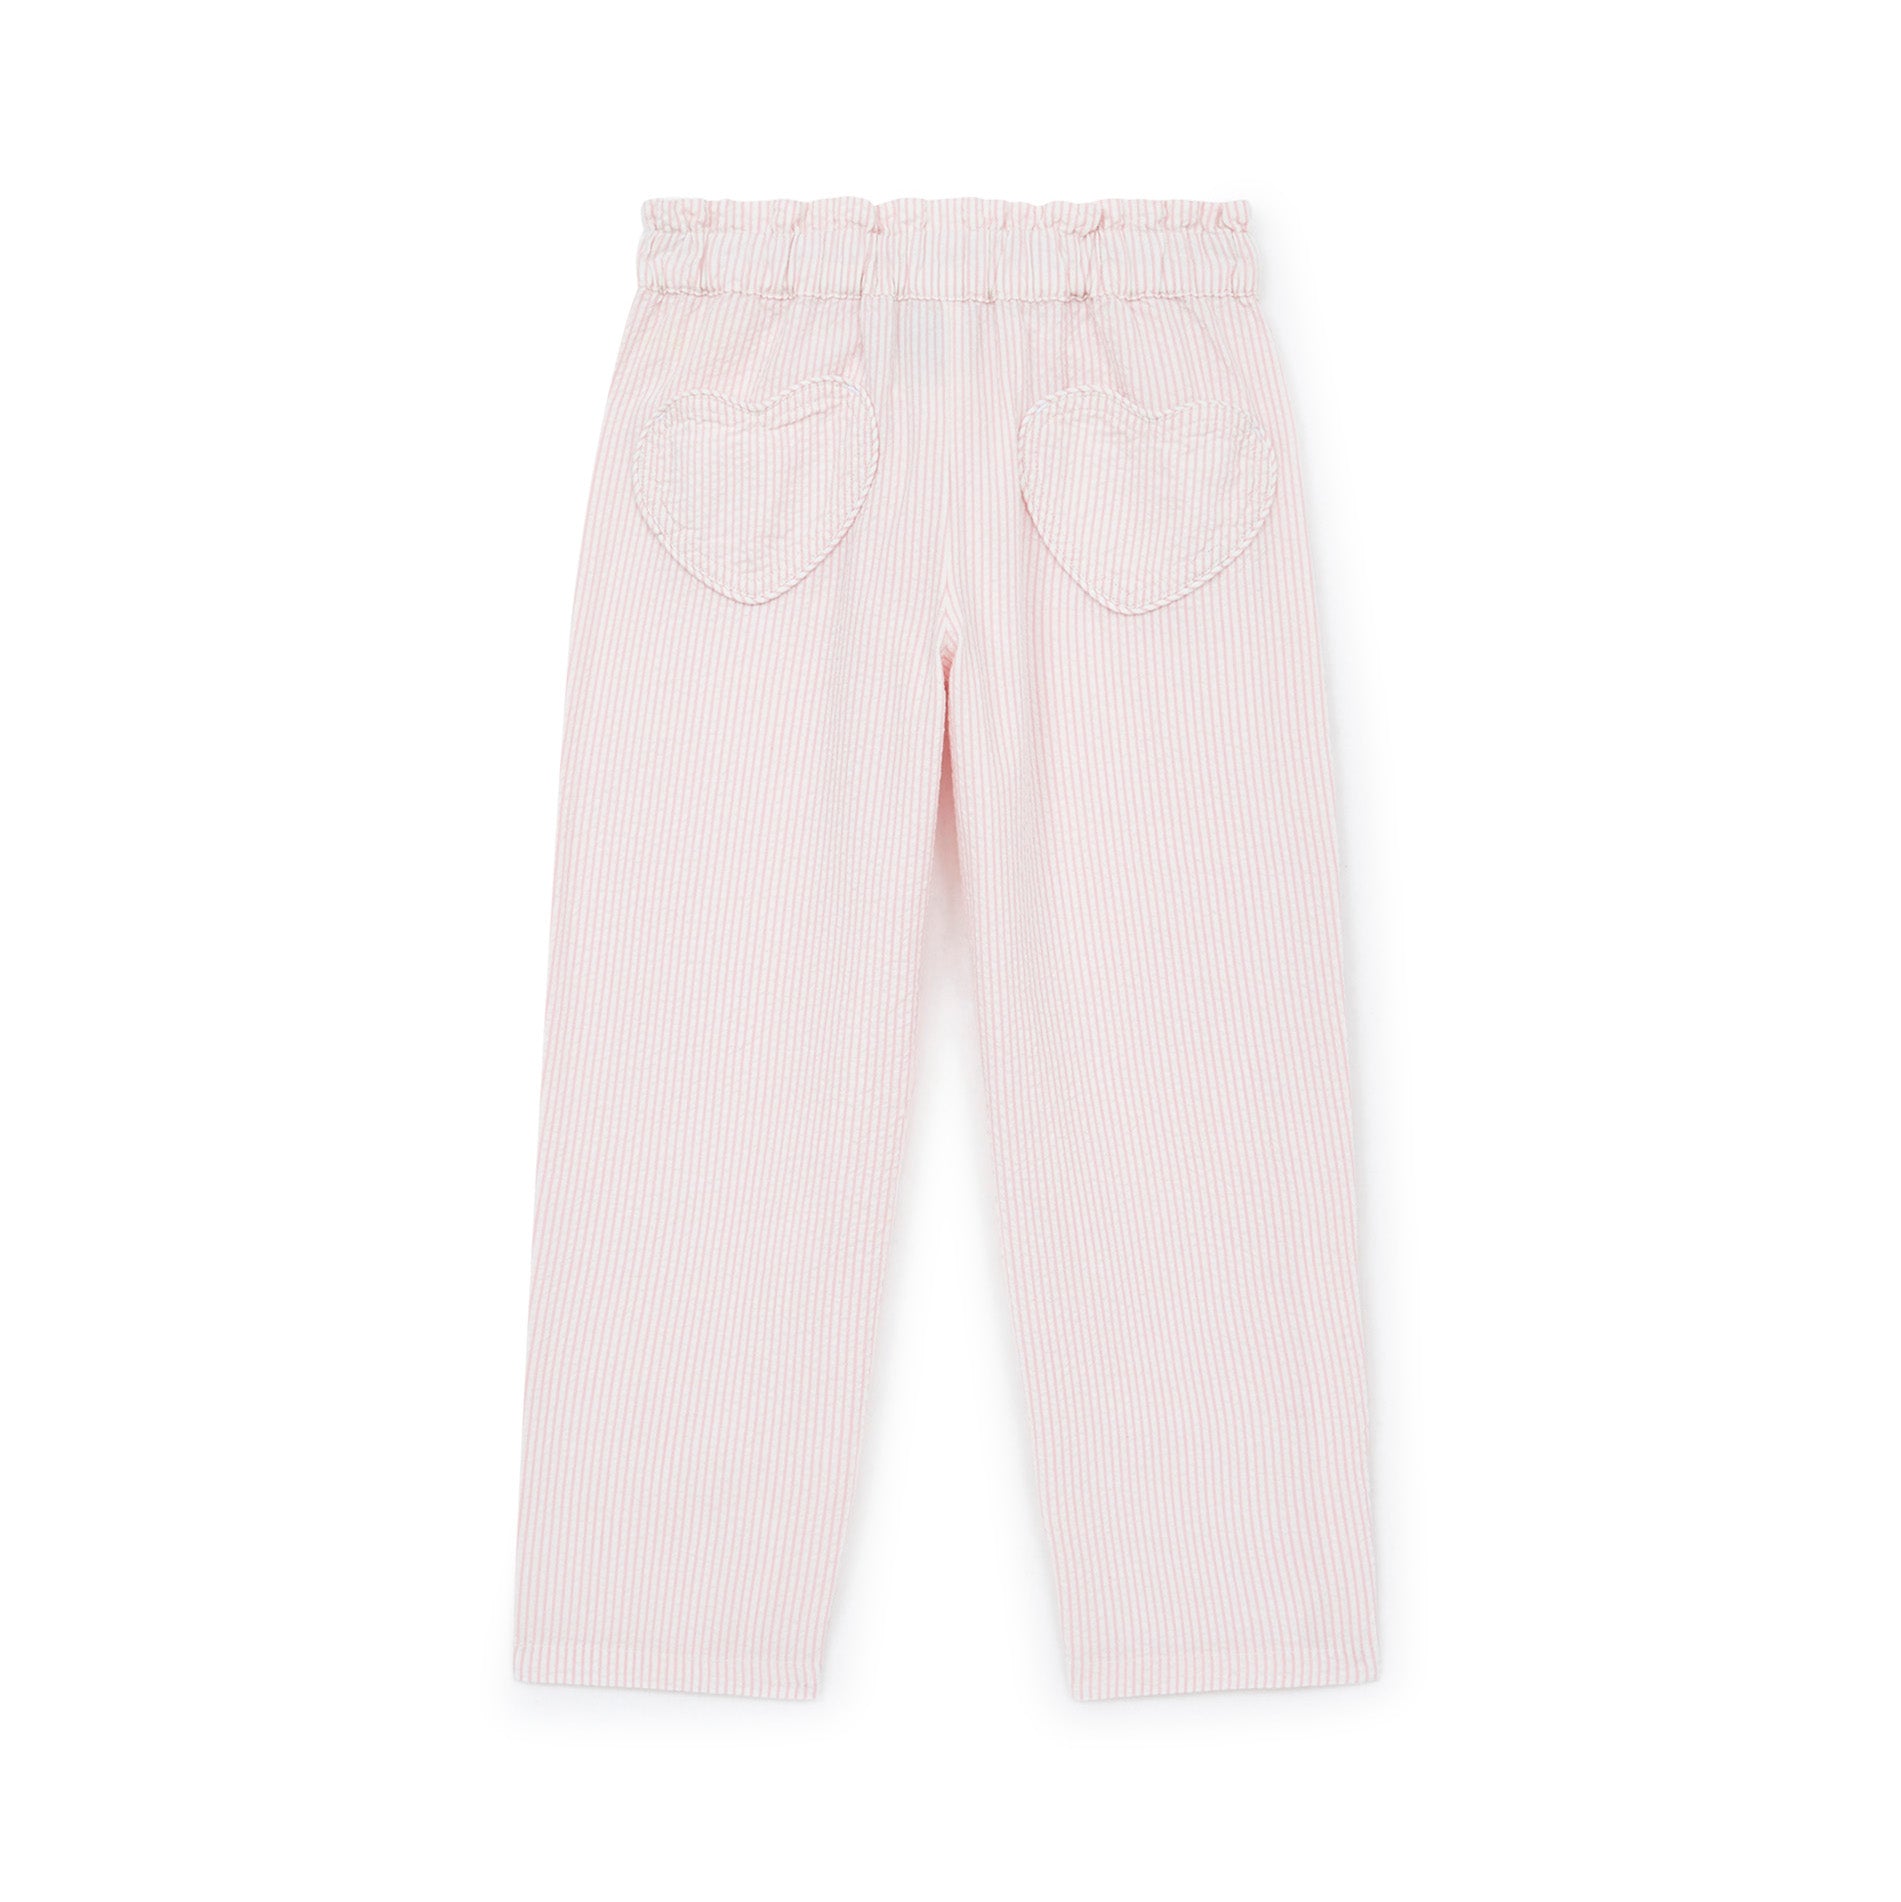 Girls Pink Stripes Cotton Trousers